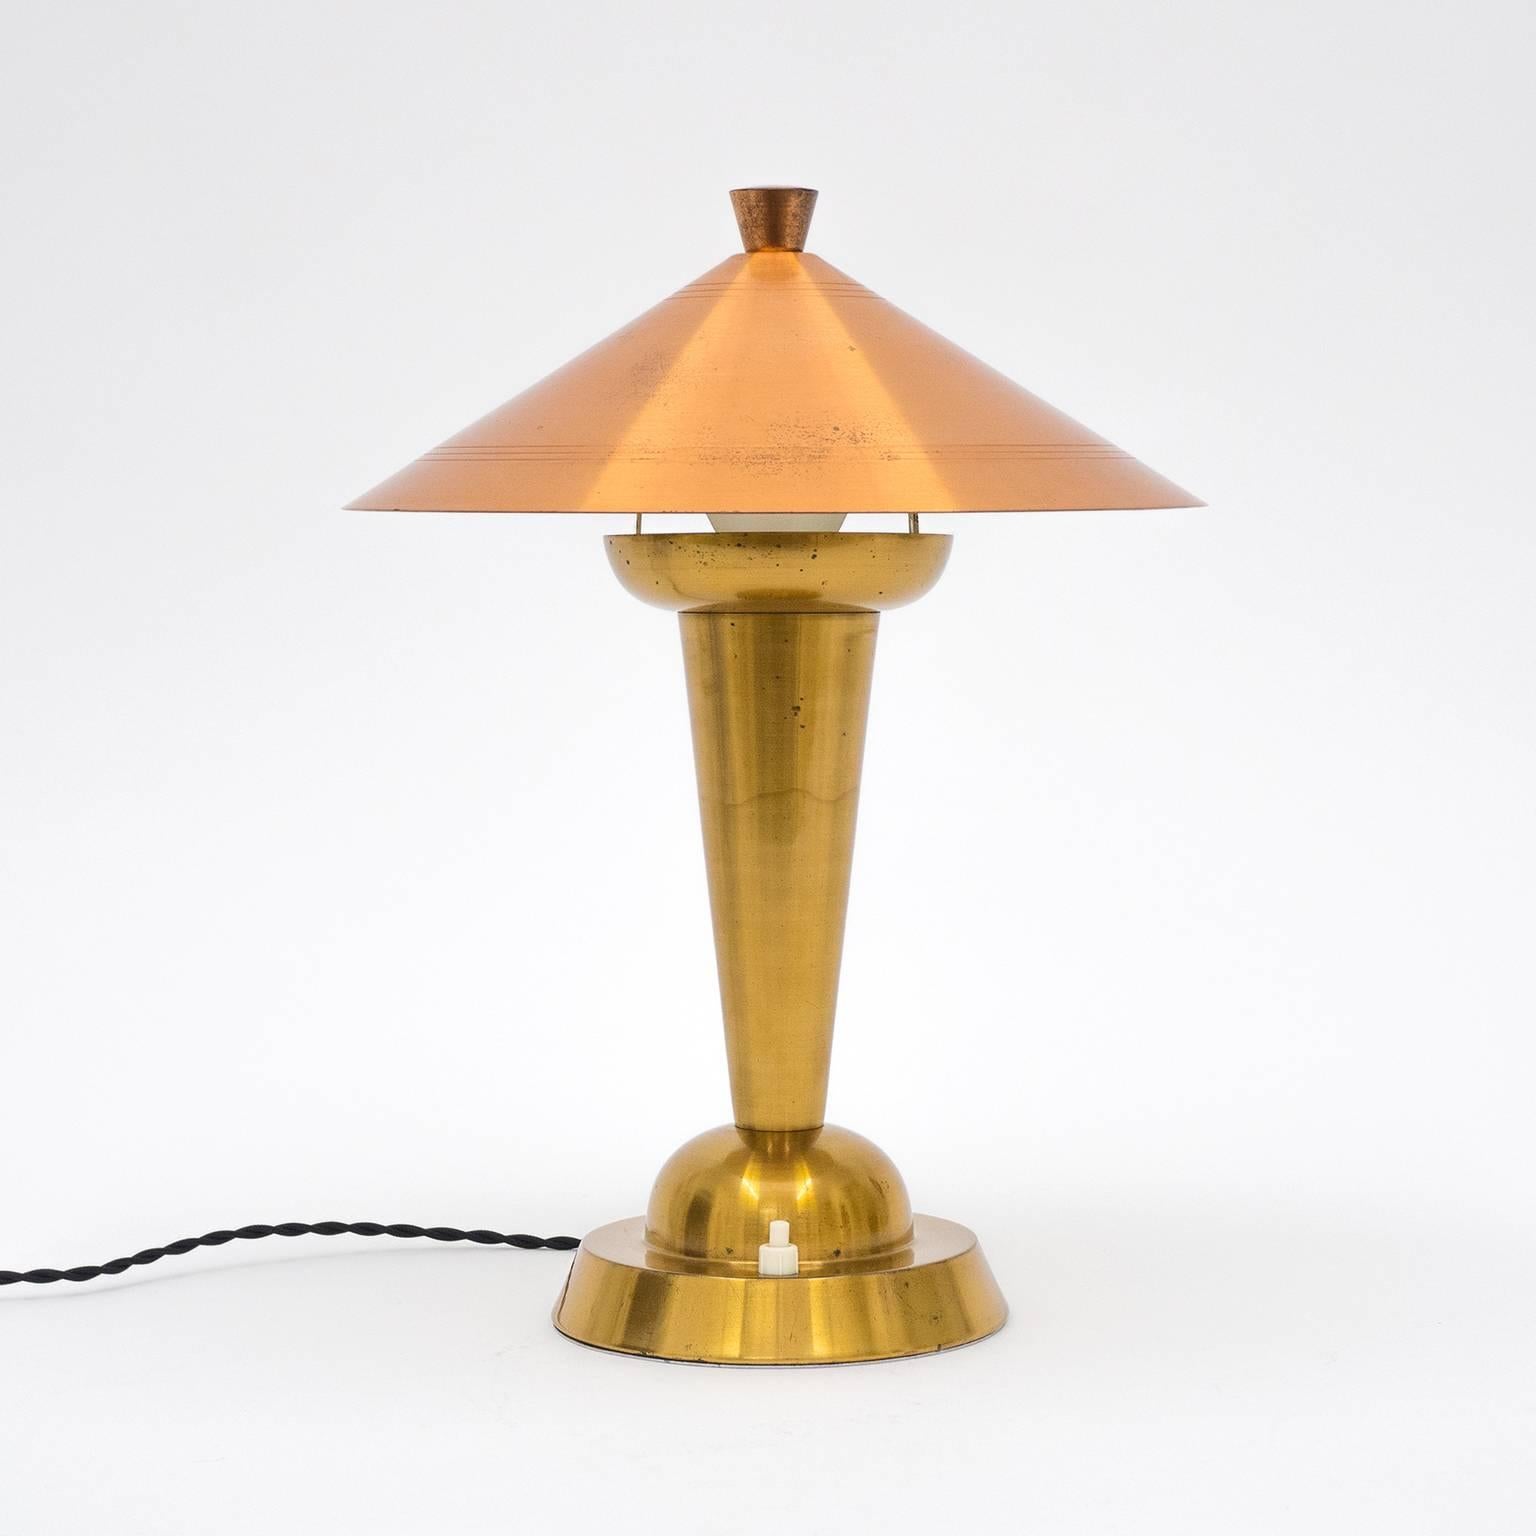 Beautiful two-tone Art Deco table or desk lamp from Belgium, 1930s. Manufactured by "Gersyl" all the elements are precision tooled enhancing the stark geometric Art Deco vocabulary. The finial and shade, which has concentric engravings,